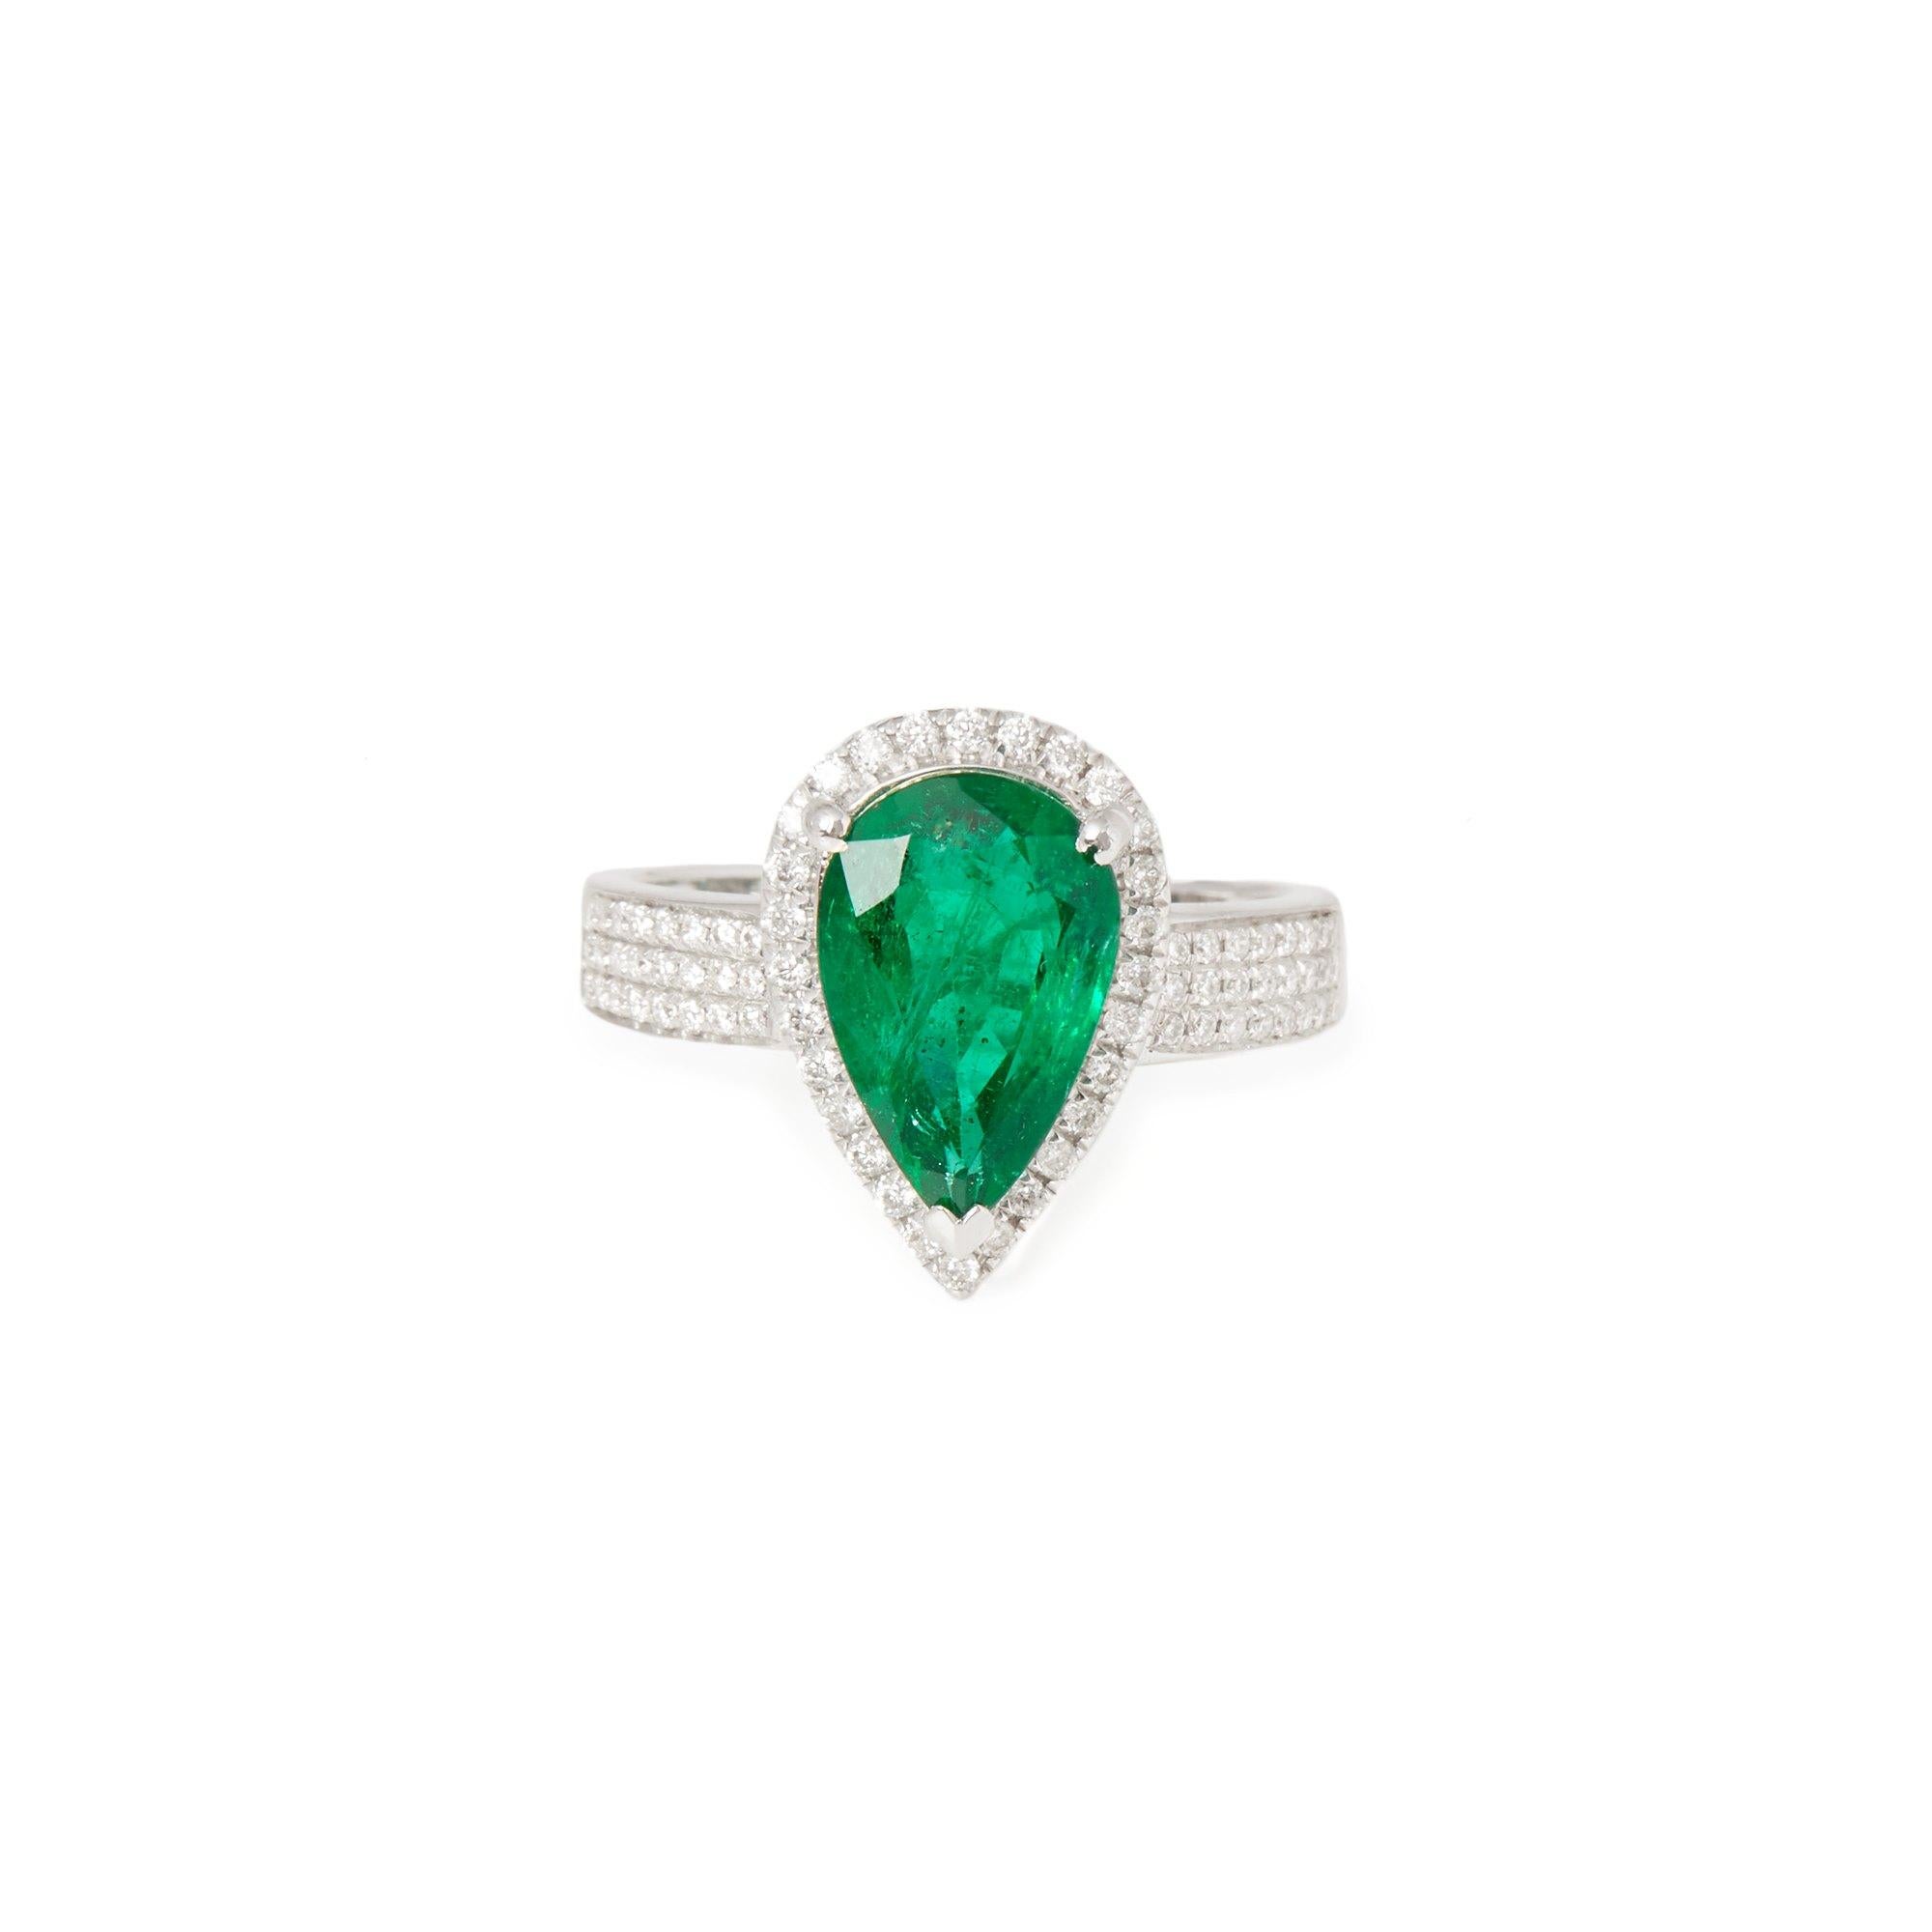 This ring designed by David Jerome is from his private collection and features one pear cut Emerald totalling 3.66cts sourced in Zambia. Set with round brilliant cut Diamonds totalling 0.38cts mounted in an 18k white gold setting. Finger size UK N,